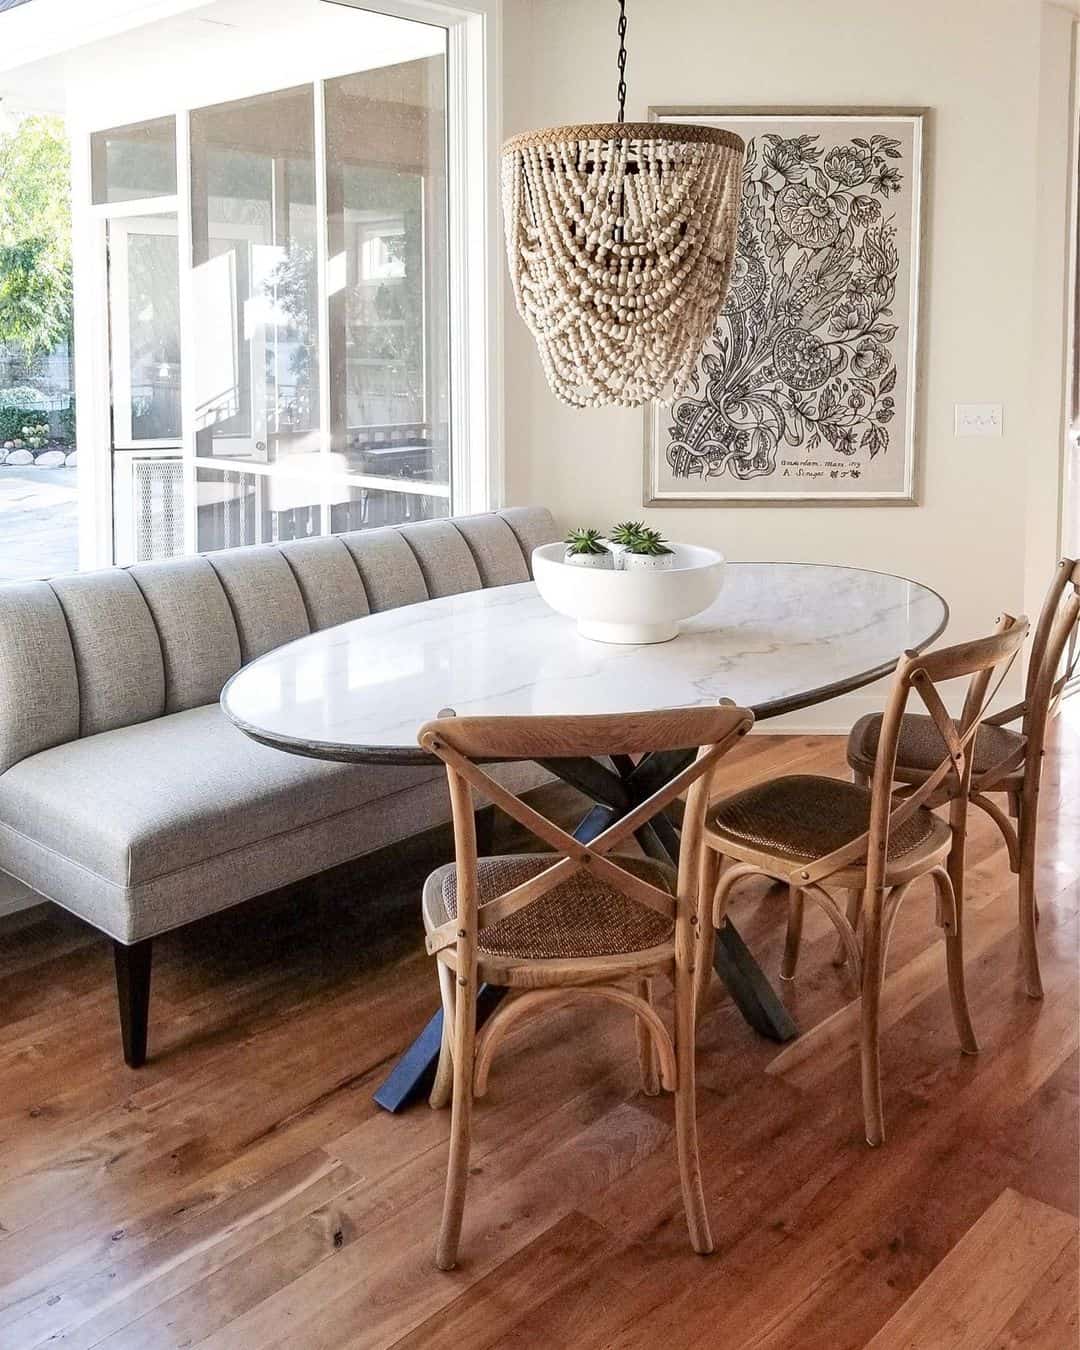 Modern and Farmhouse Fusion in the Breakfast Nook